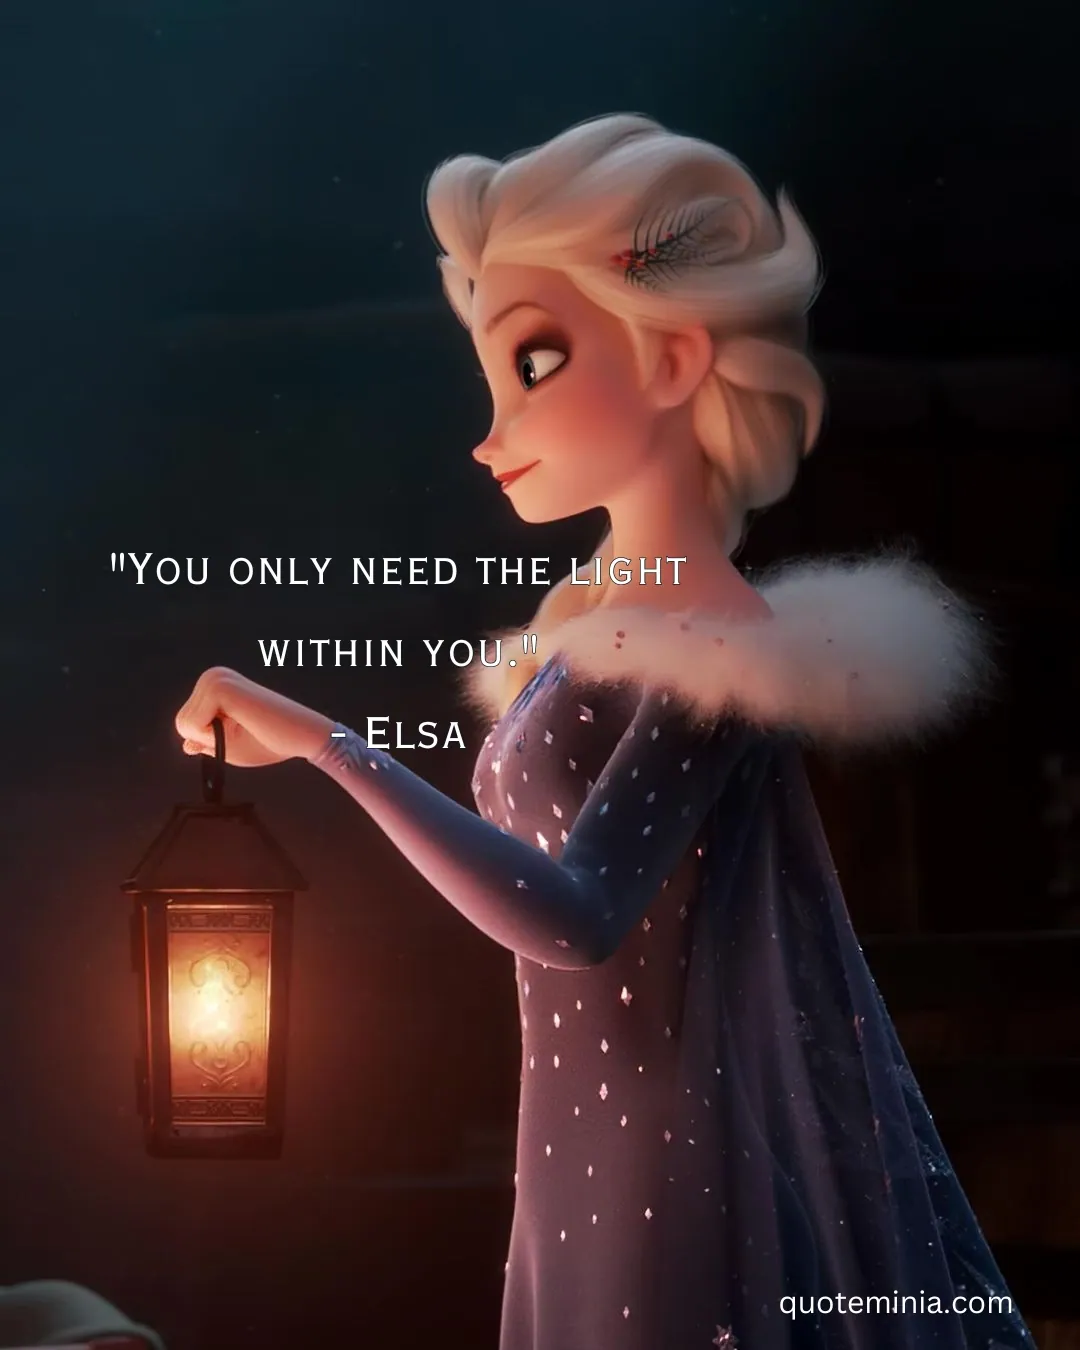 Quotes From Frozen